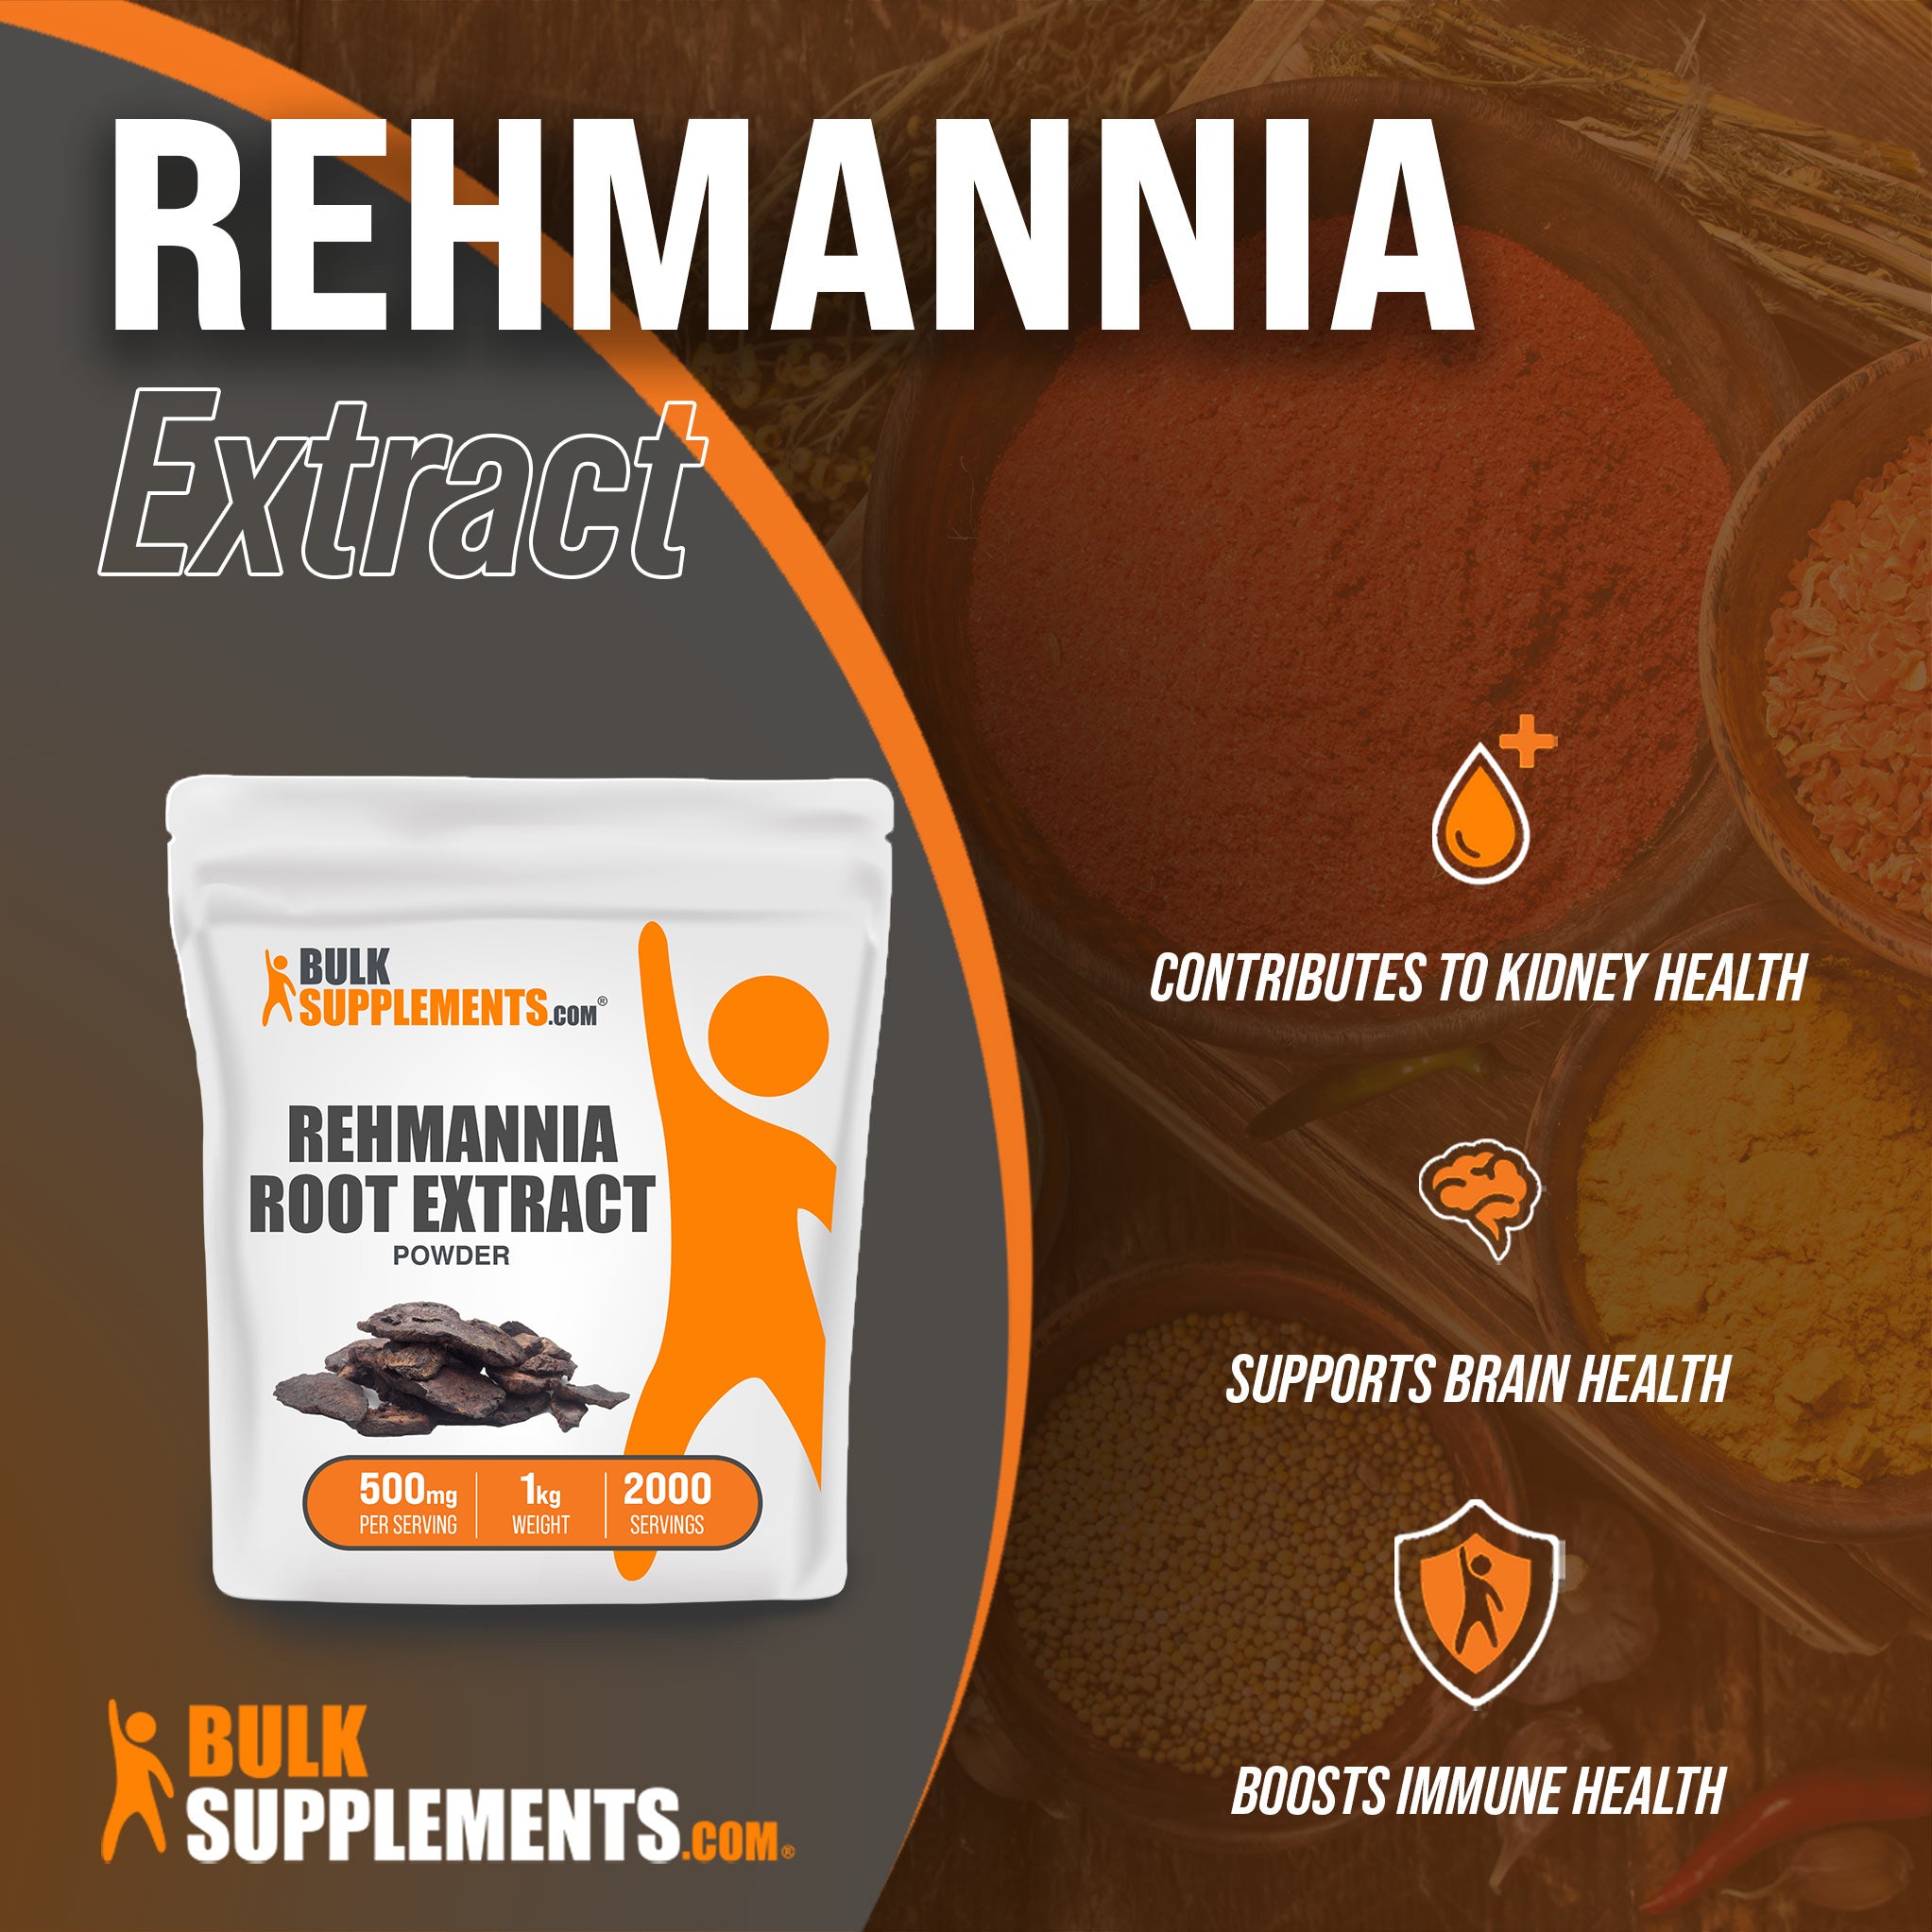 Benefits of Rehmannia Extract: contributes to kidney health, supports brain health, boosts immune health